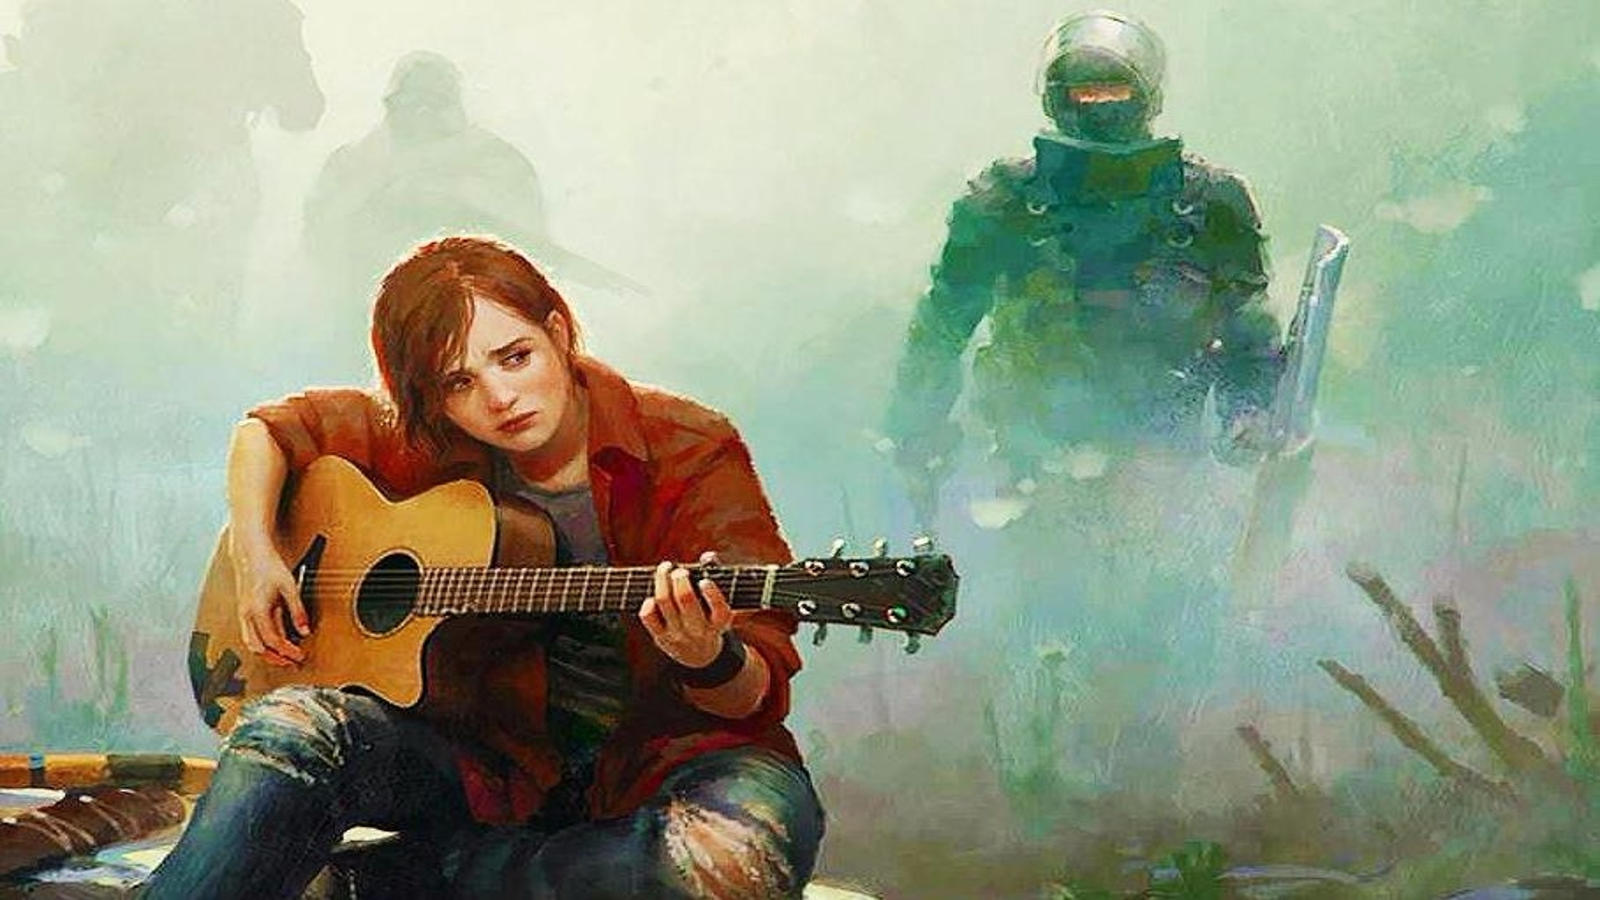 The Last of Us Part 2 teaser divides fans over one big theory